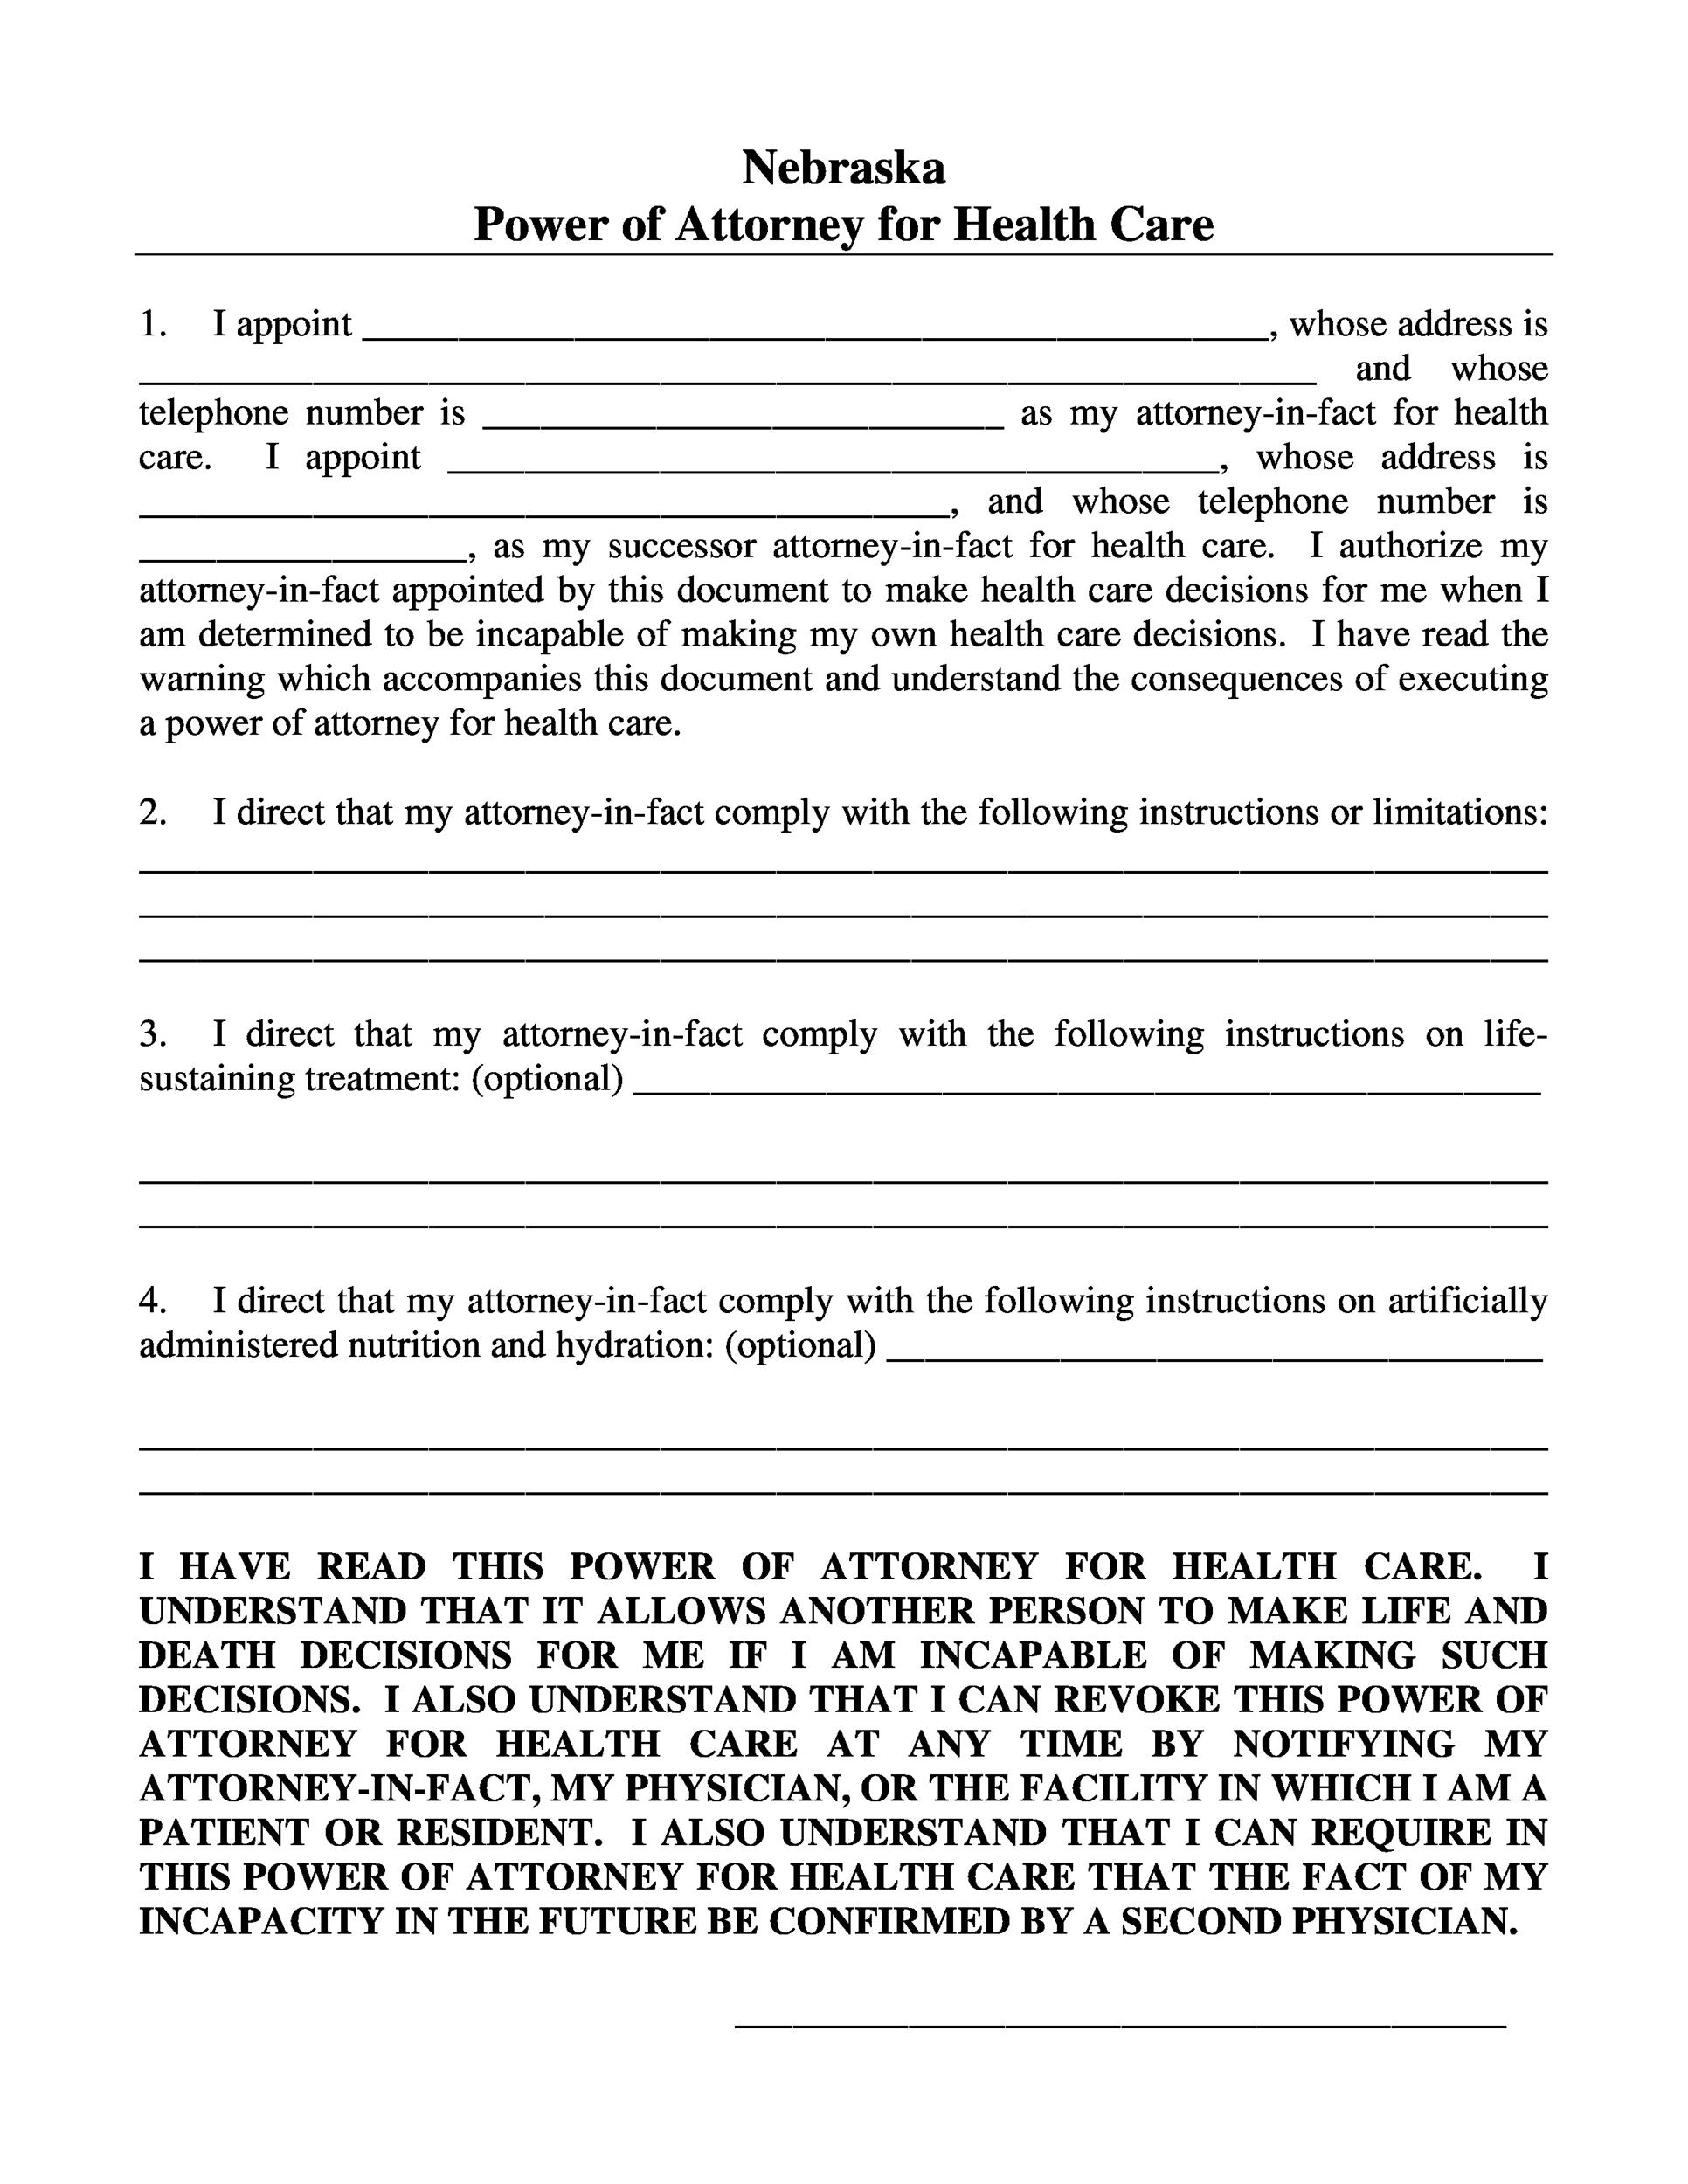 50 Free Power of Attorney Forms Templates (Durable Medical General)